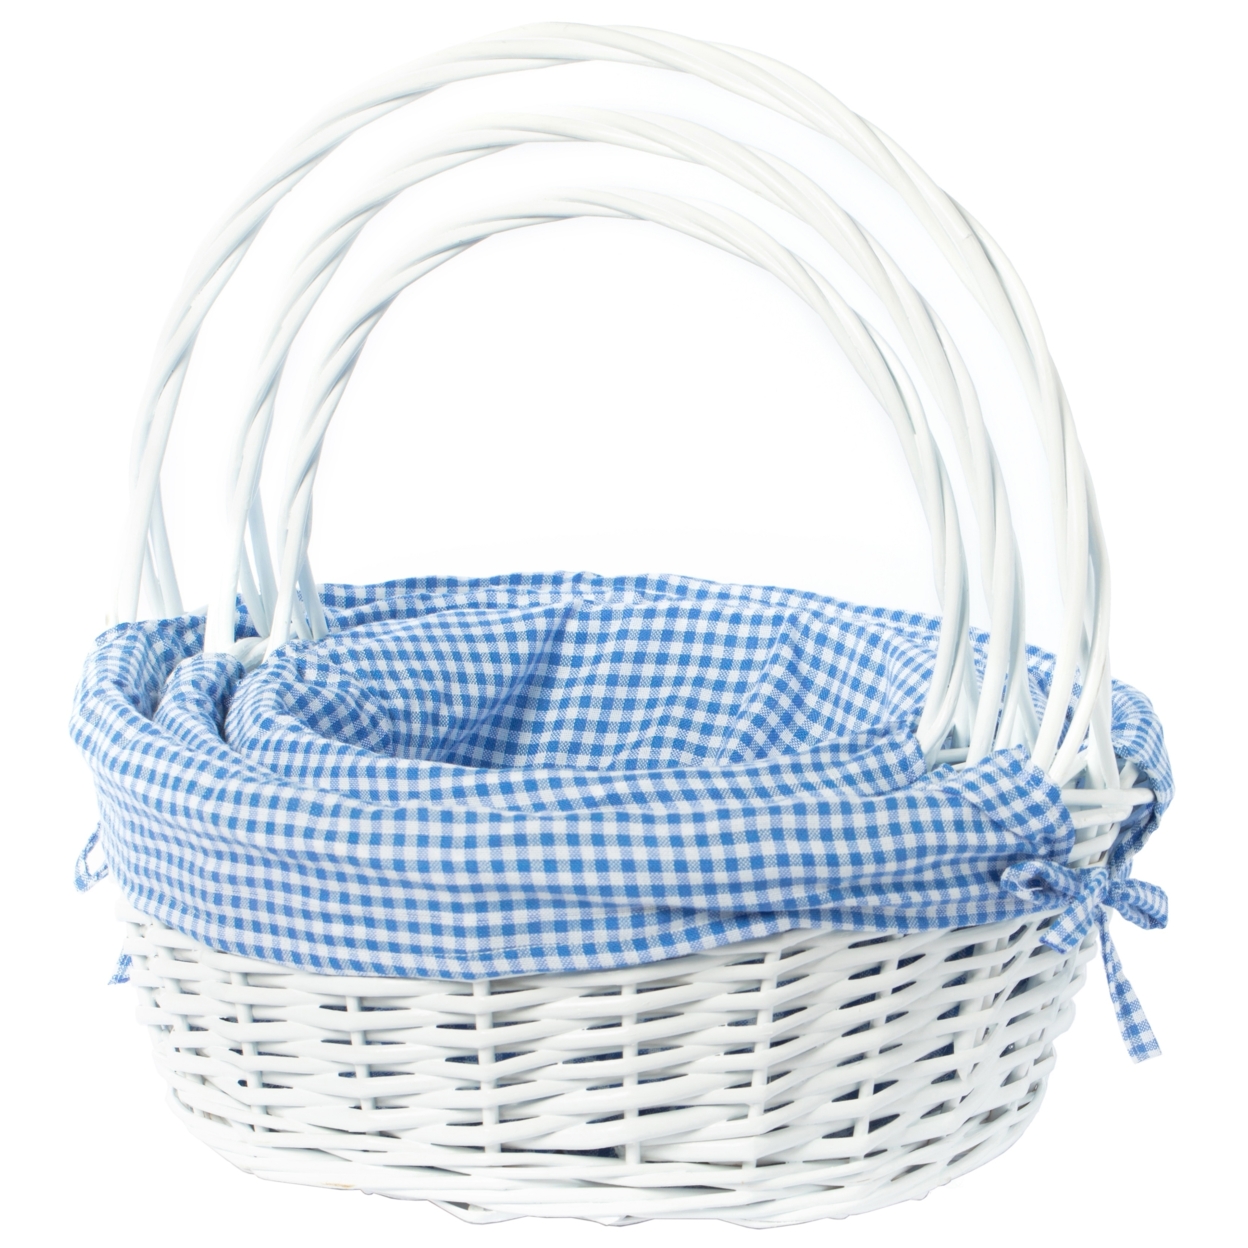 White Round Willow Gift Basket, With Blue And White Gingham Liner And Handles - Blue Large